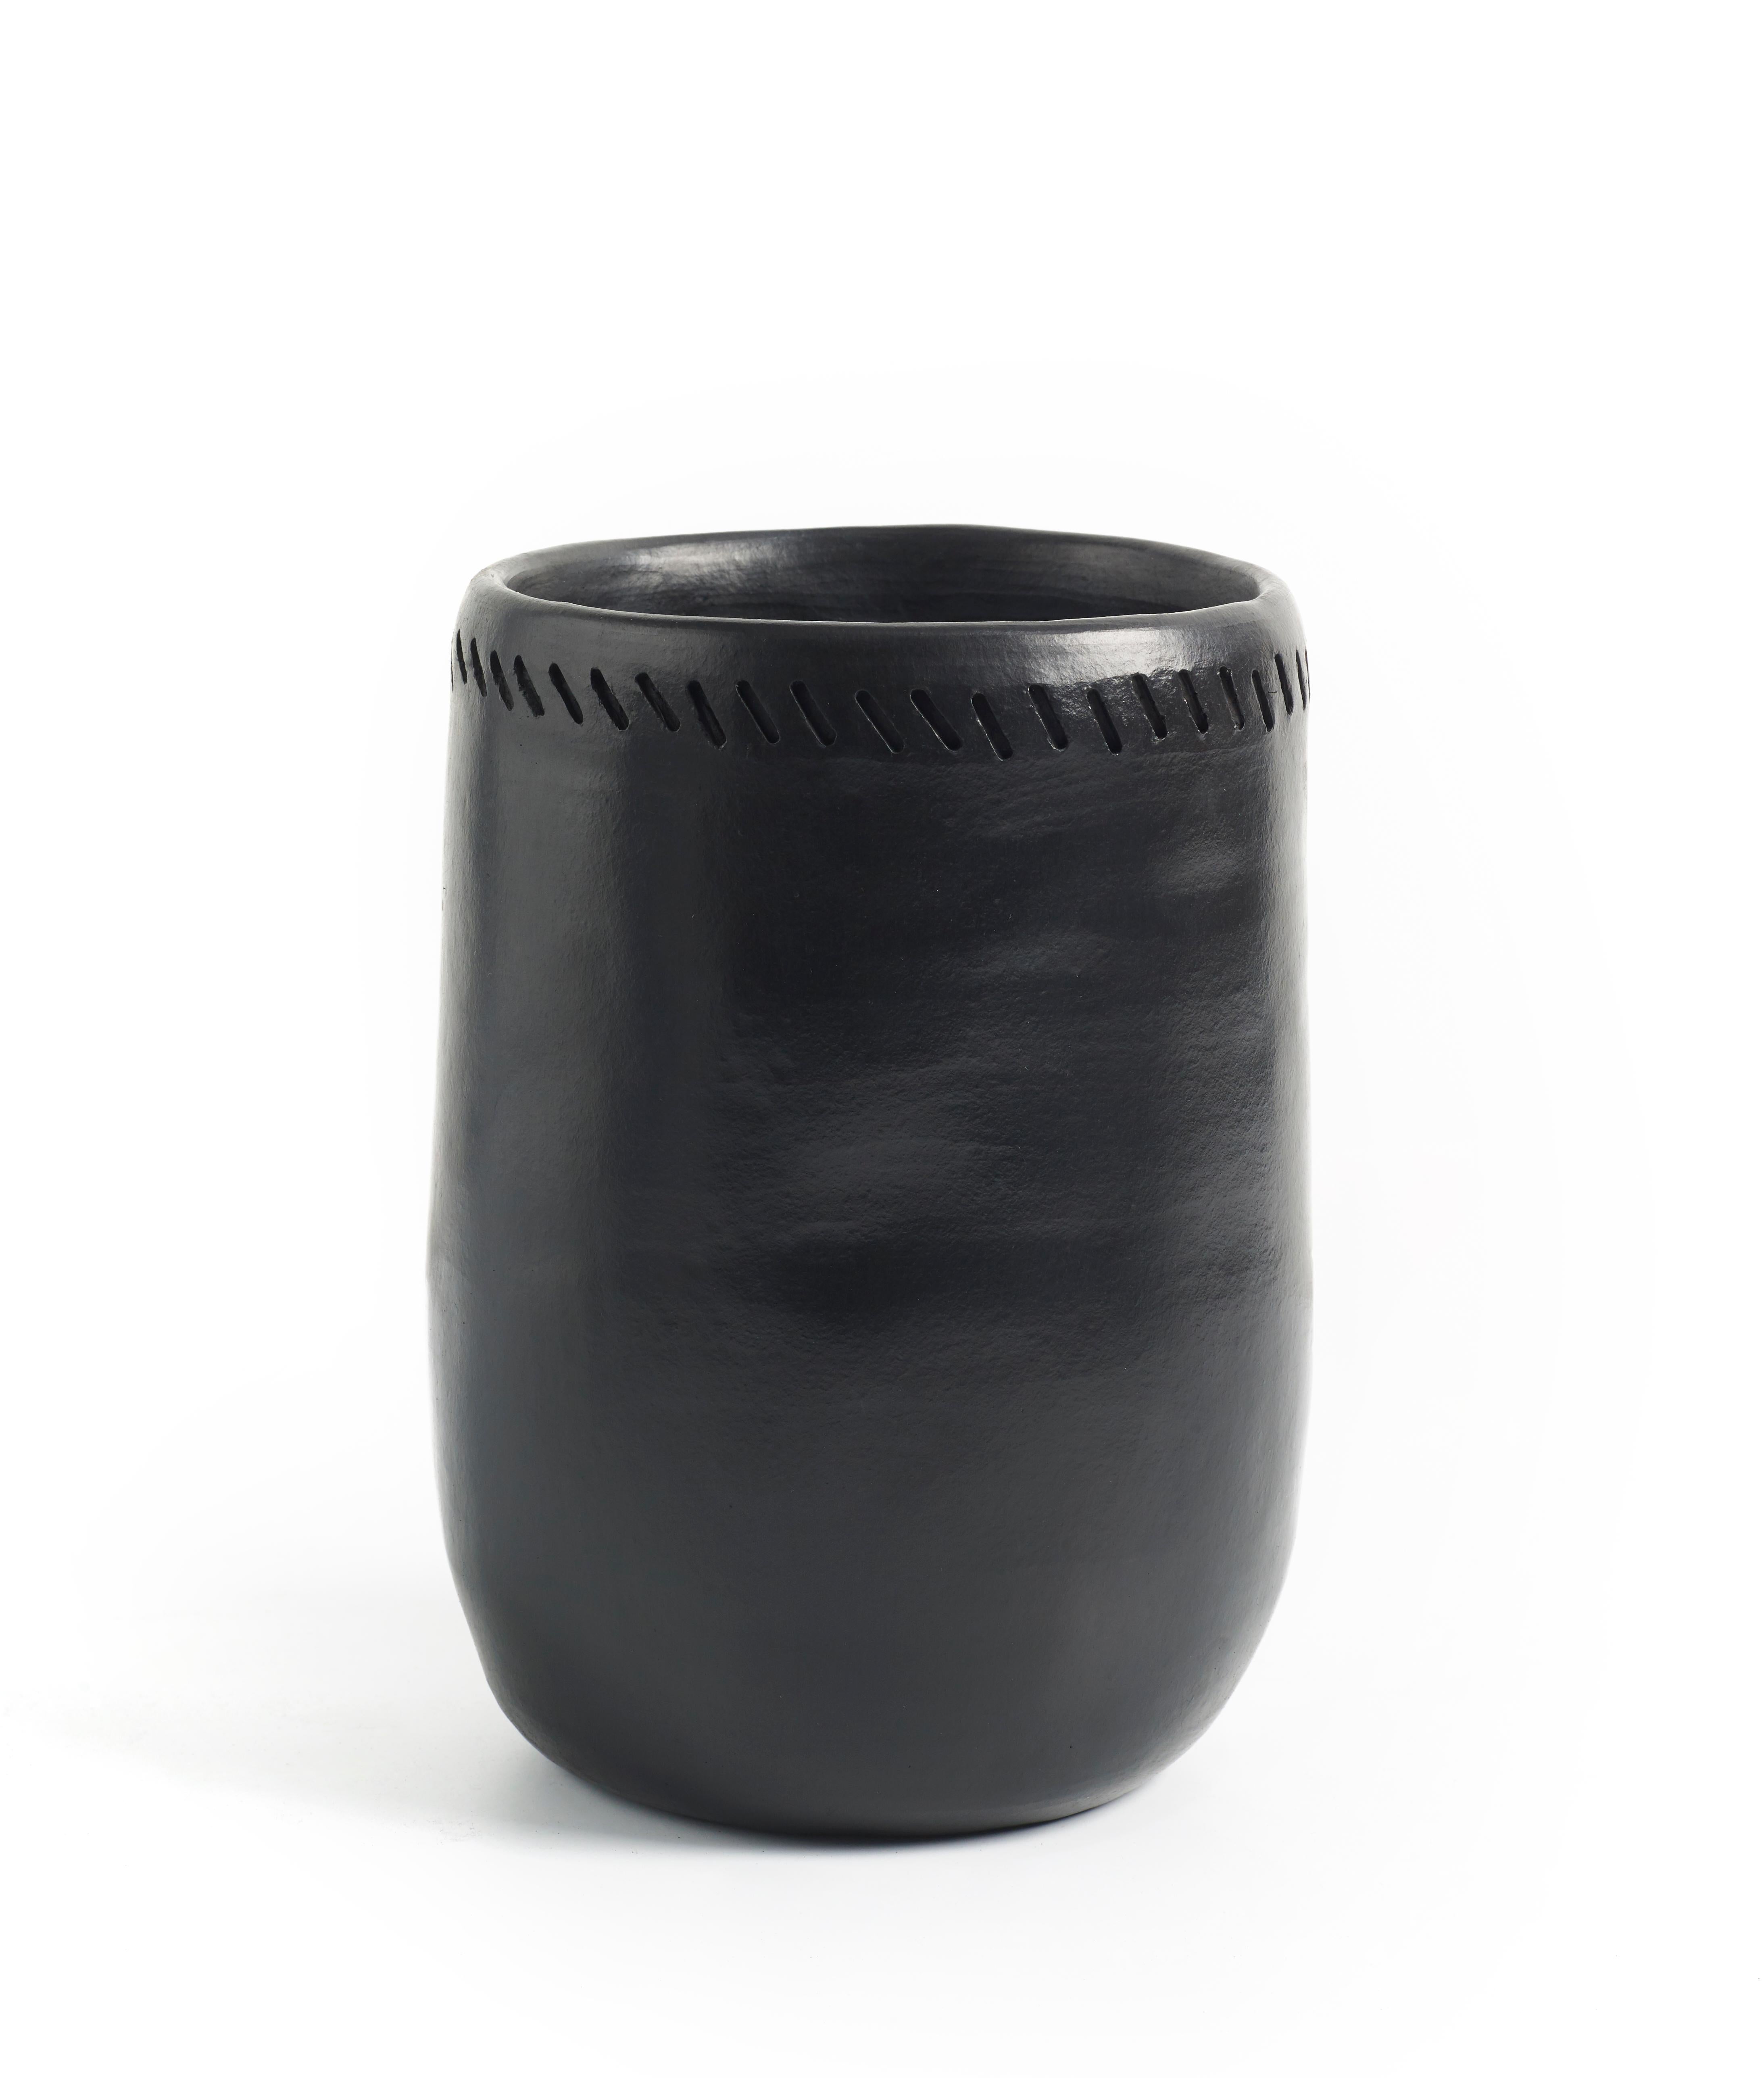 Vase 1 barro dining by Sebastian Herkner
Materials: Heat-resistant Black ceramic. 
Technique: Glazed. Oven cooked and polished with semi-precious stones. 
Dimensions: Diameter 12 cm x H 20 cm 
Available in size Large. Please contact us for more